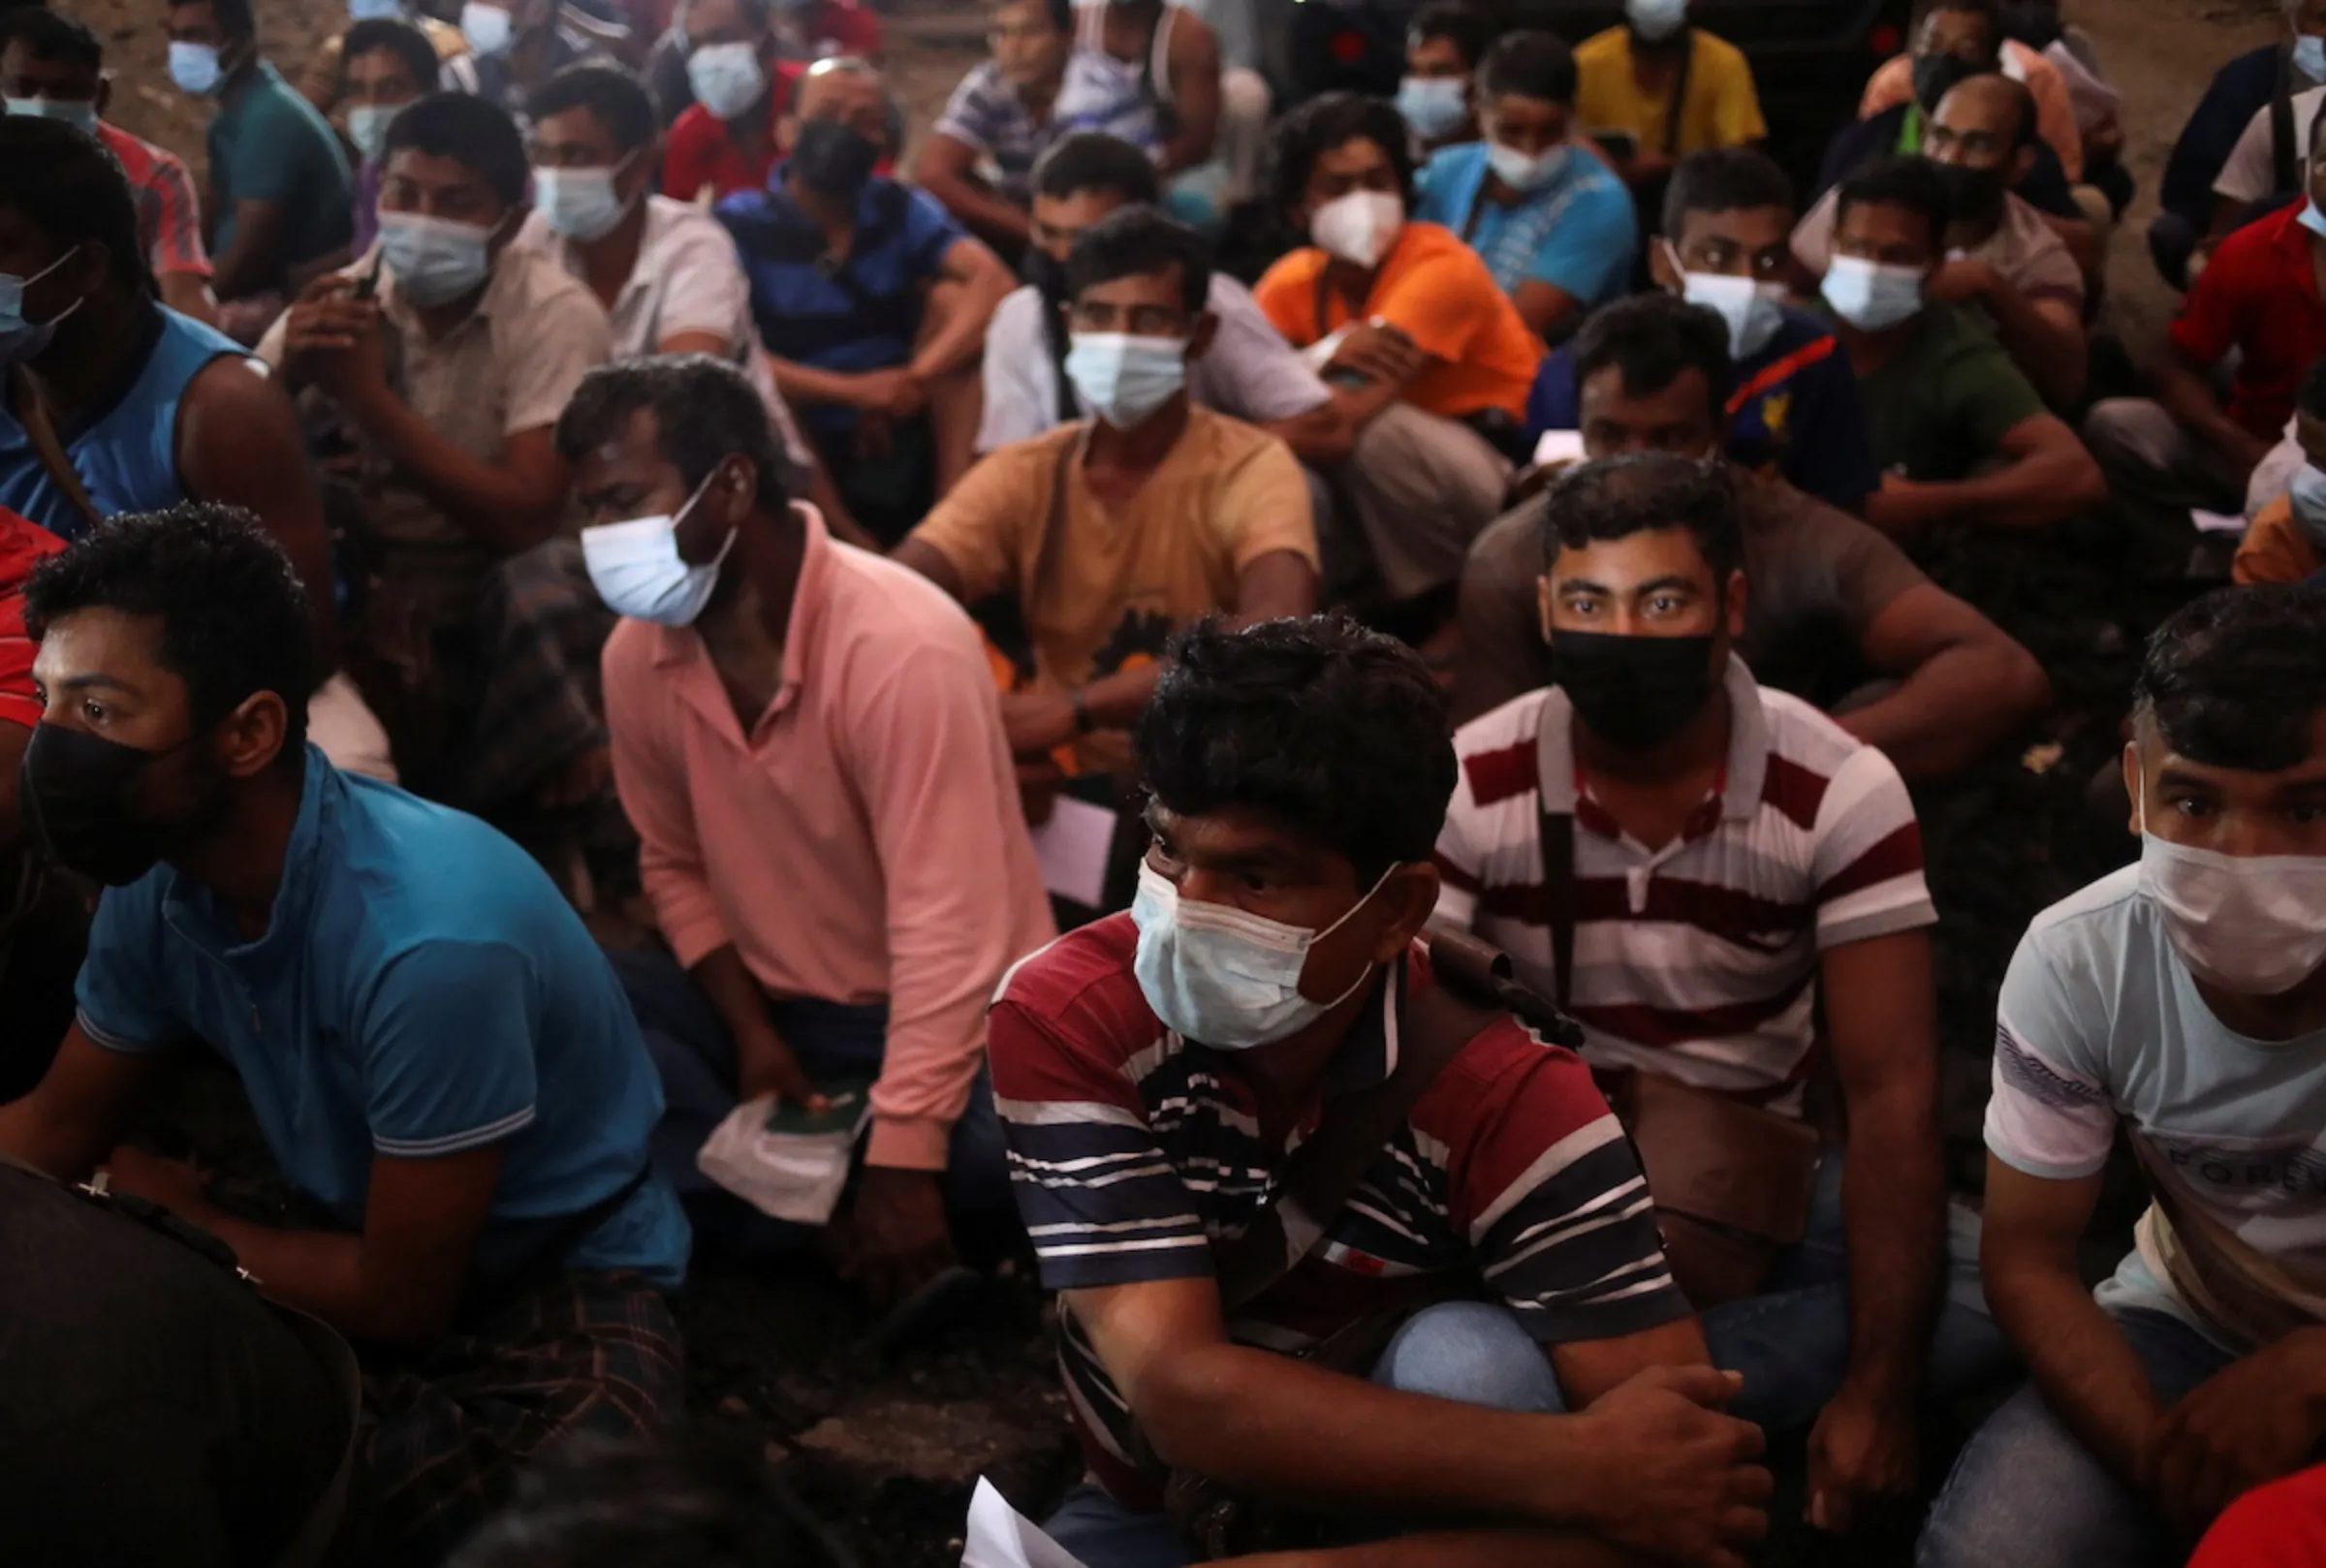 Migrant workers gather at the compound of their dormitory for a document check, during a joint operation by the Department of Labour and several other Malaysian government agencies on workers' living condition and other criteria of forced labour and human trafficking, in Kuala Lumpur, Malaysia, March 17, 2022. REUTERS/Hasnoor Hussain